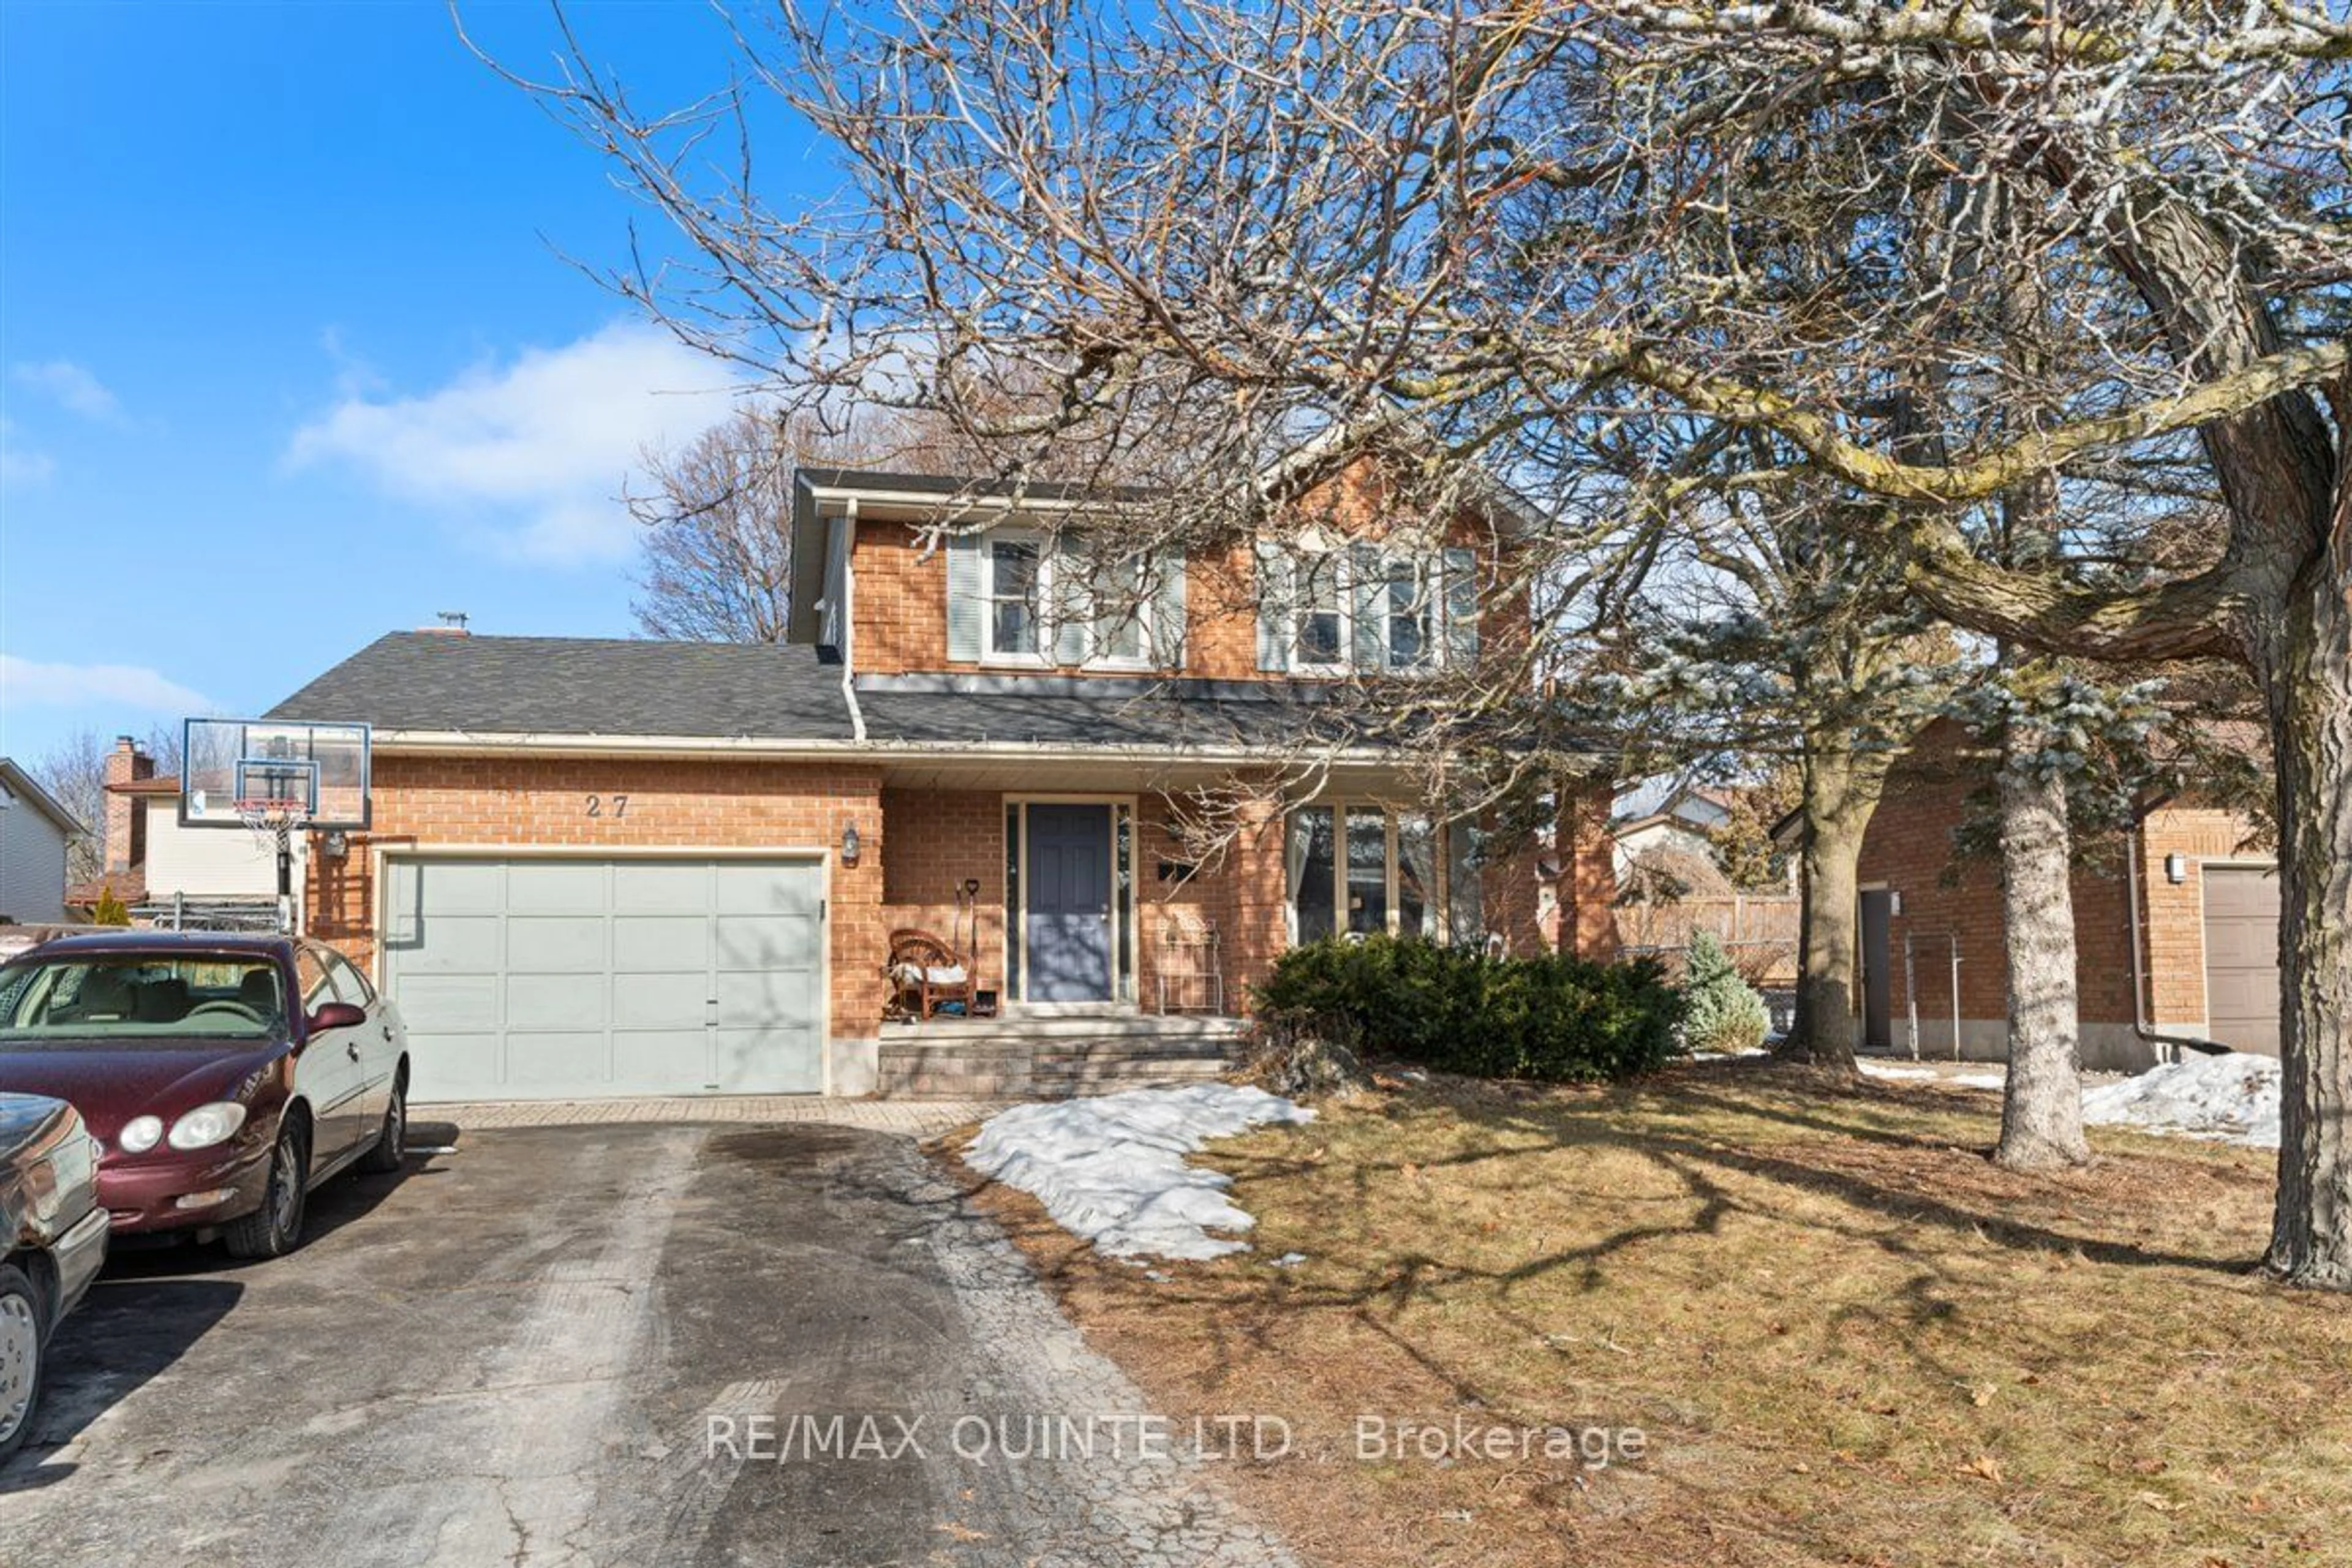 Home with brick exterior material for 27 Morris Dr, Belleville Ontario K8P 5B3